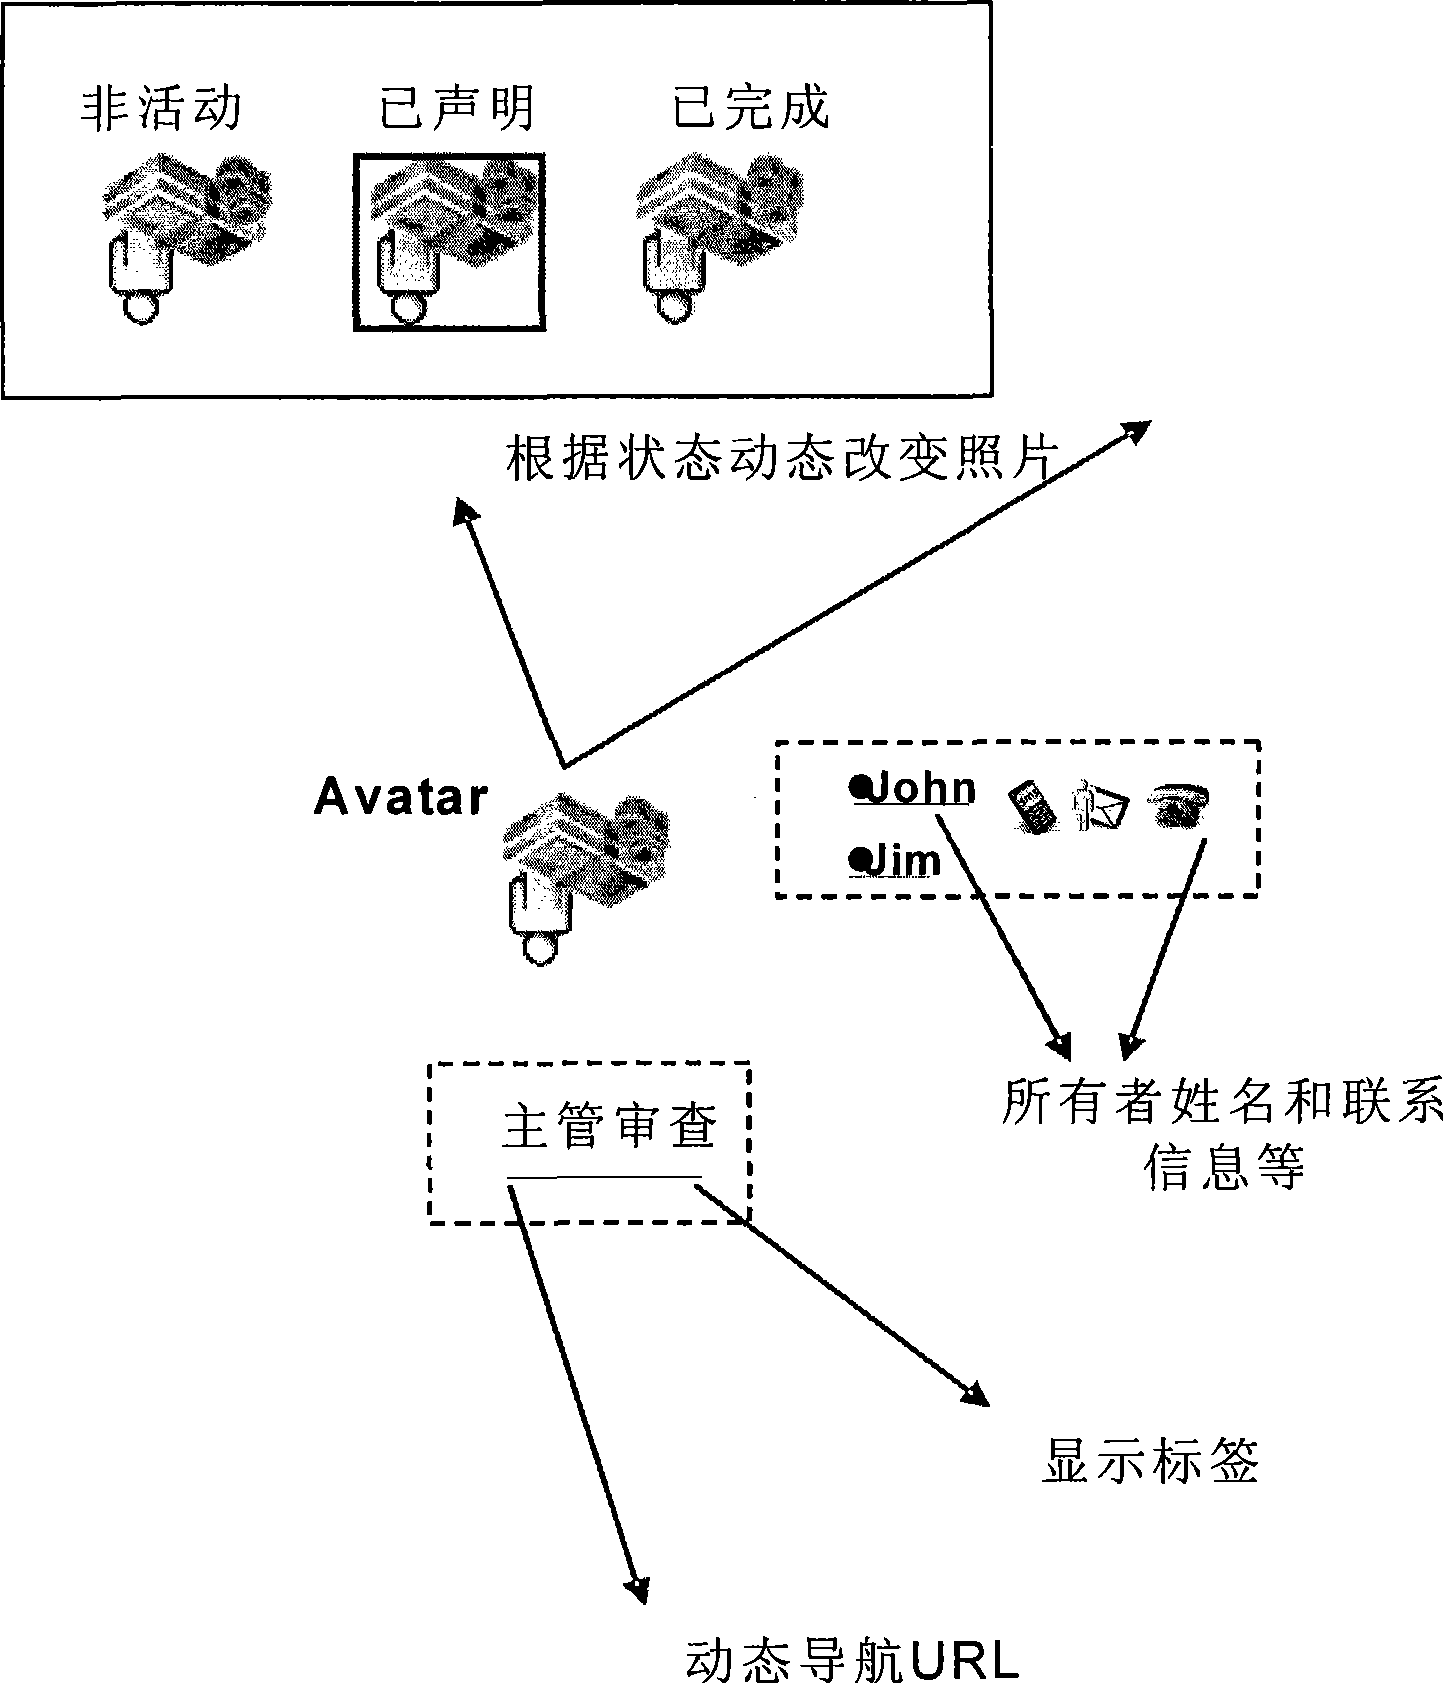 Apparatus and method for generating surveillance view of executable service flowpath